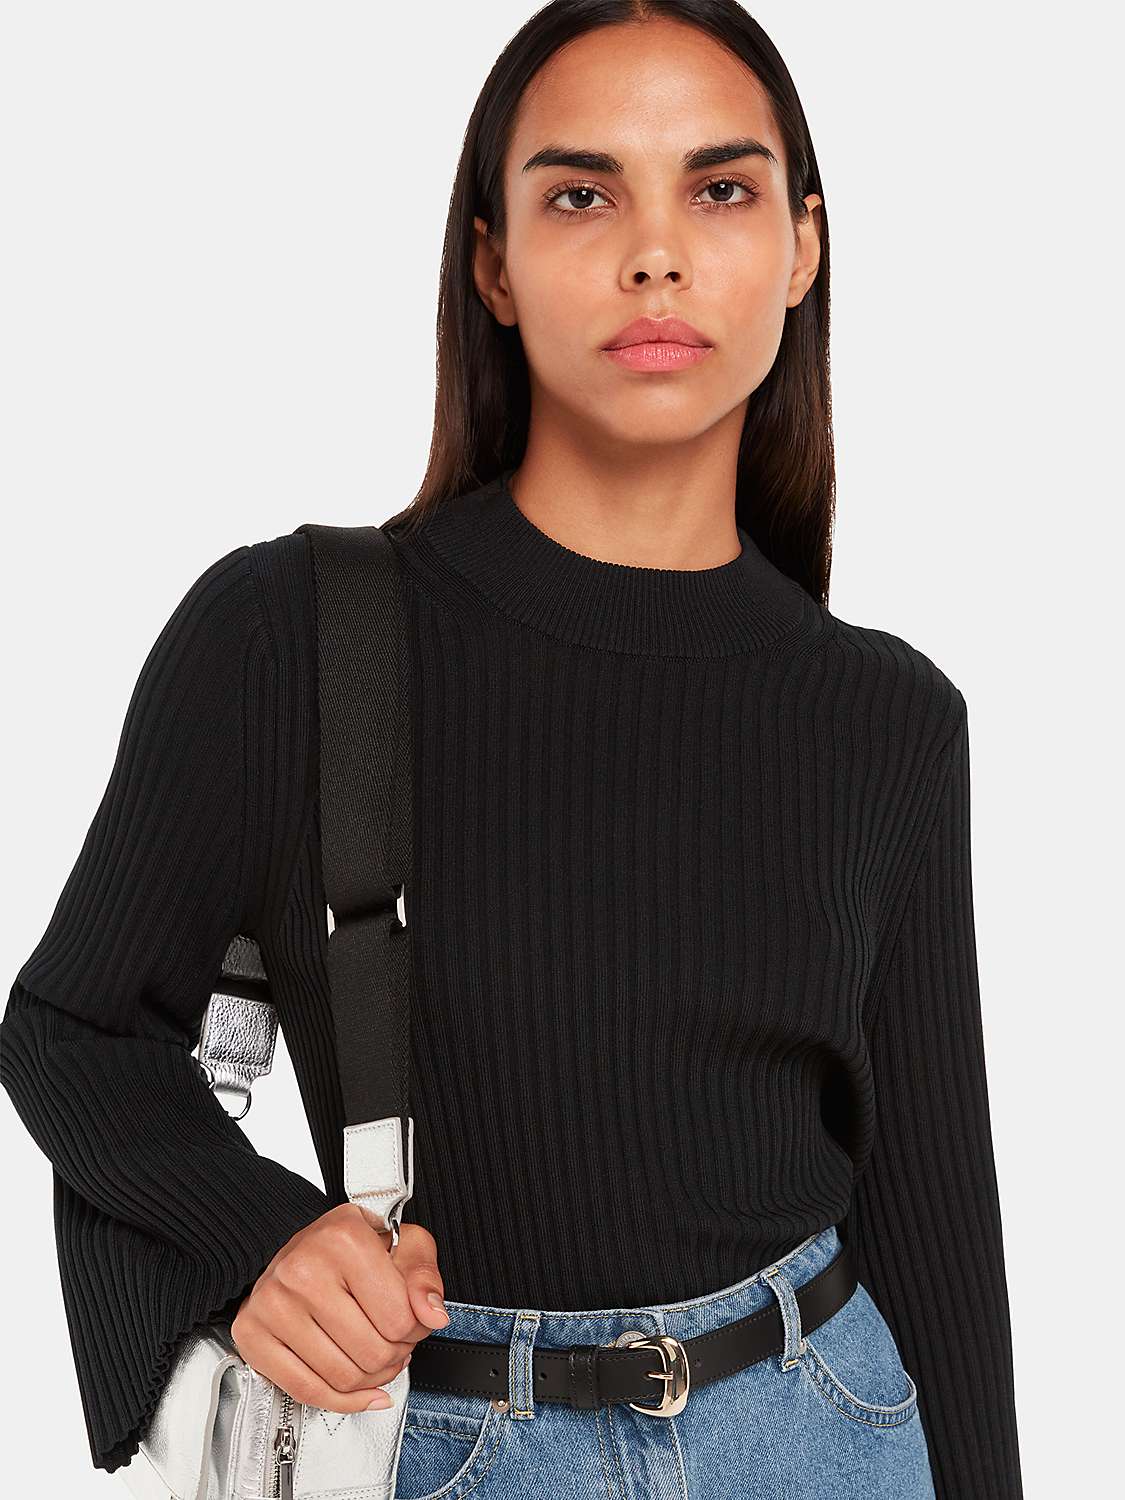 Whistles Fluted Sleeve Knit Tunic Top, Black at John Lewis & Partners